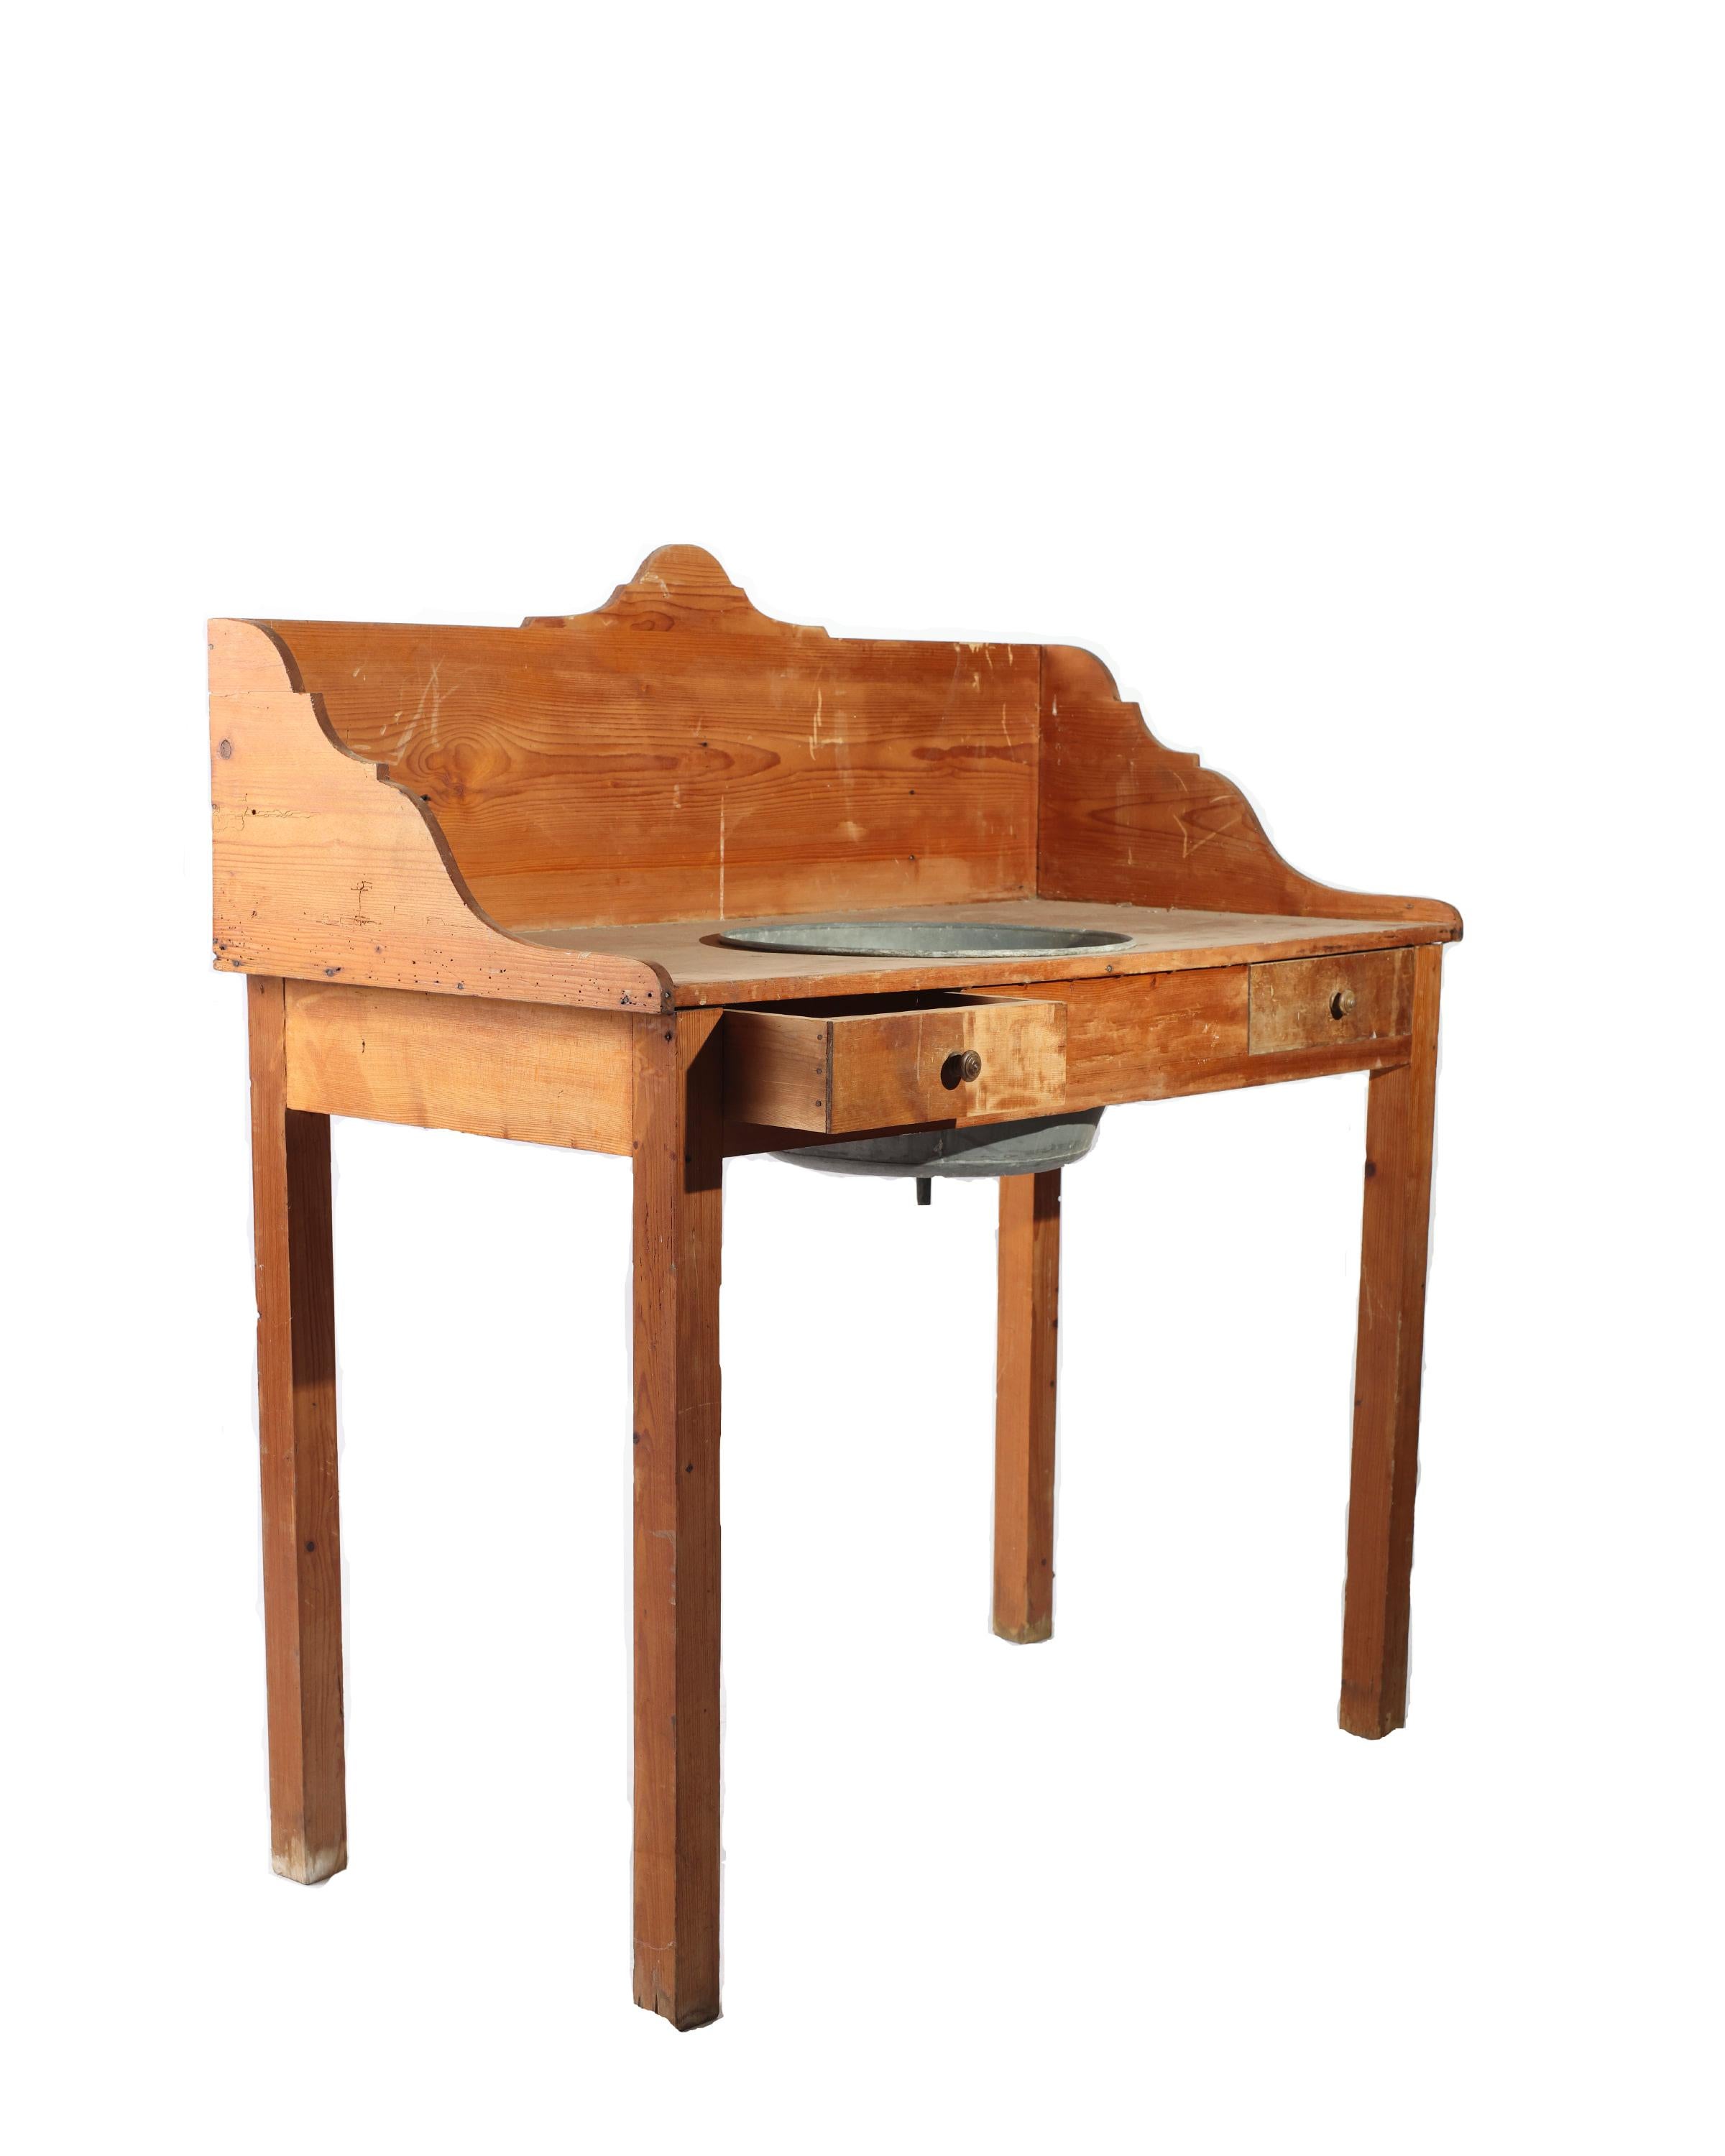 French Provincial Antique French Potting Shed Dry Sink For Sale